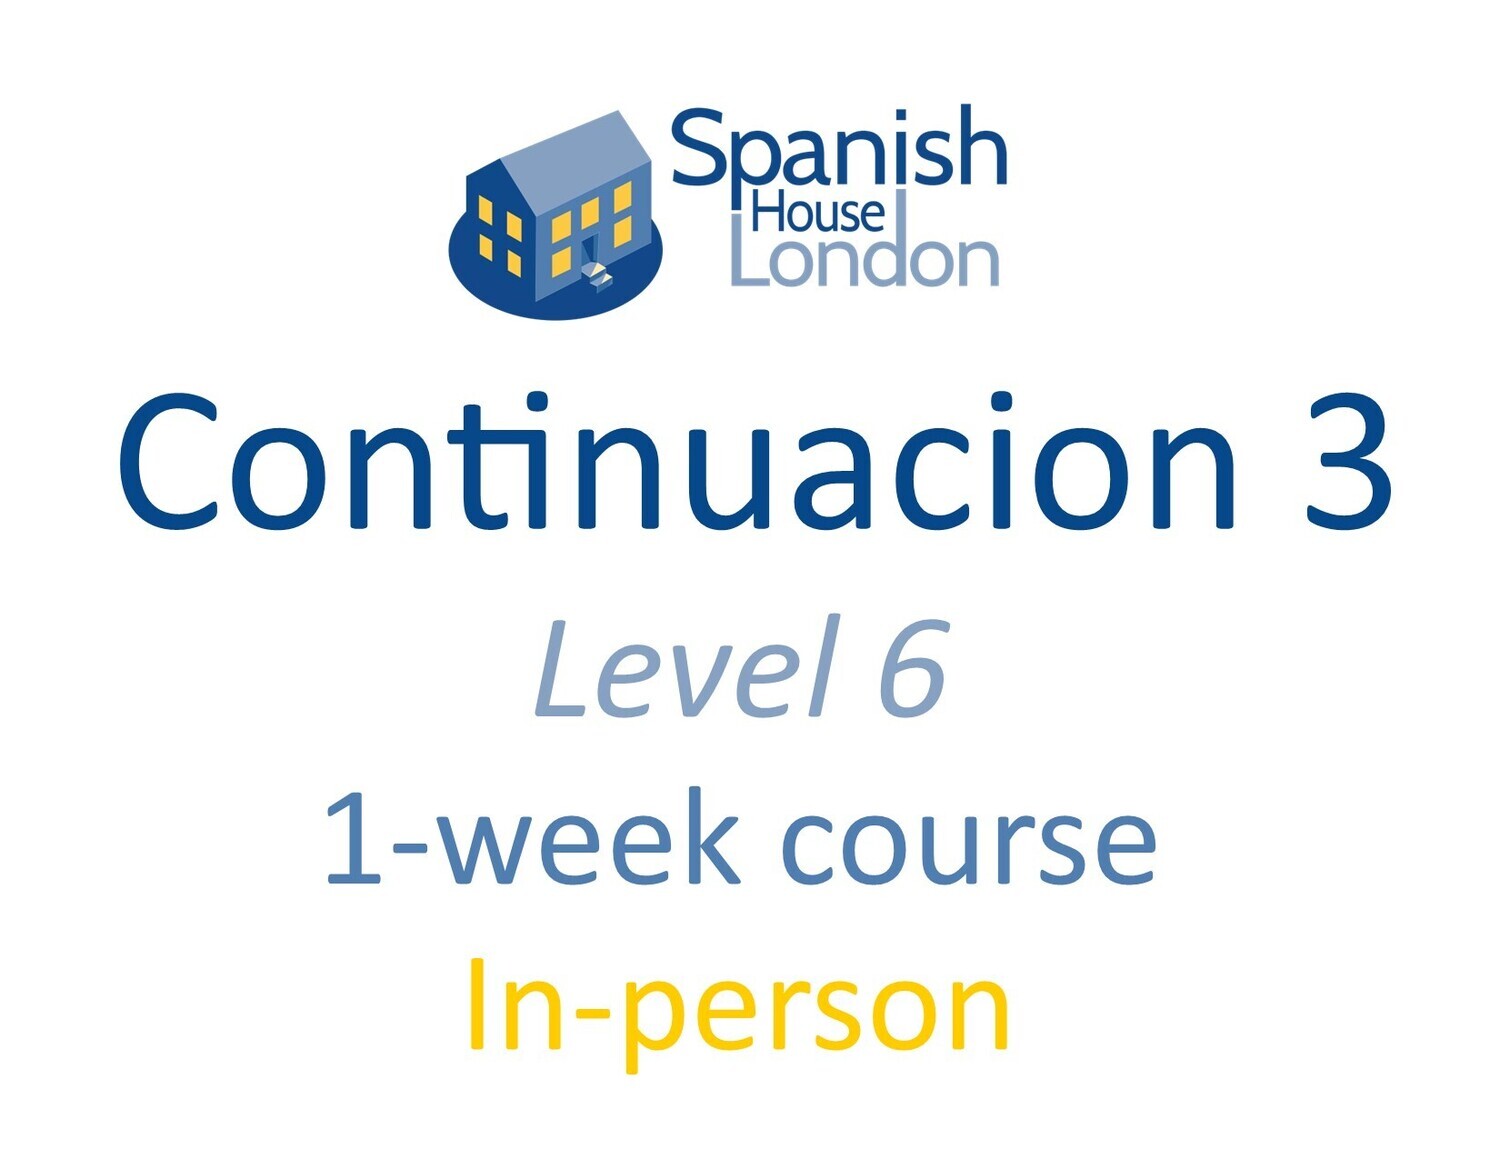 One-Week Intensive Continuacion 3 Course starting on 10th July at 10.30am in Clapham North